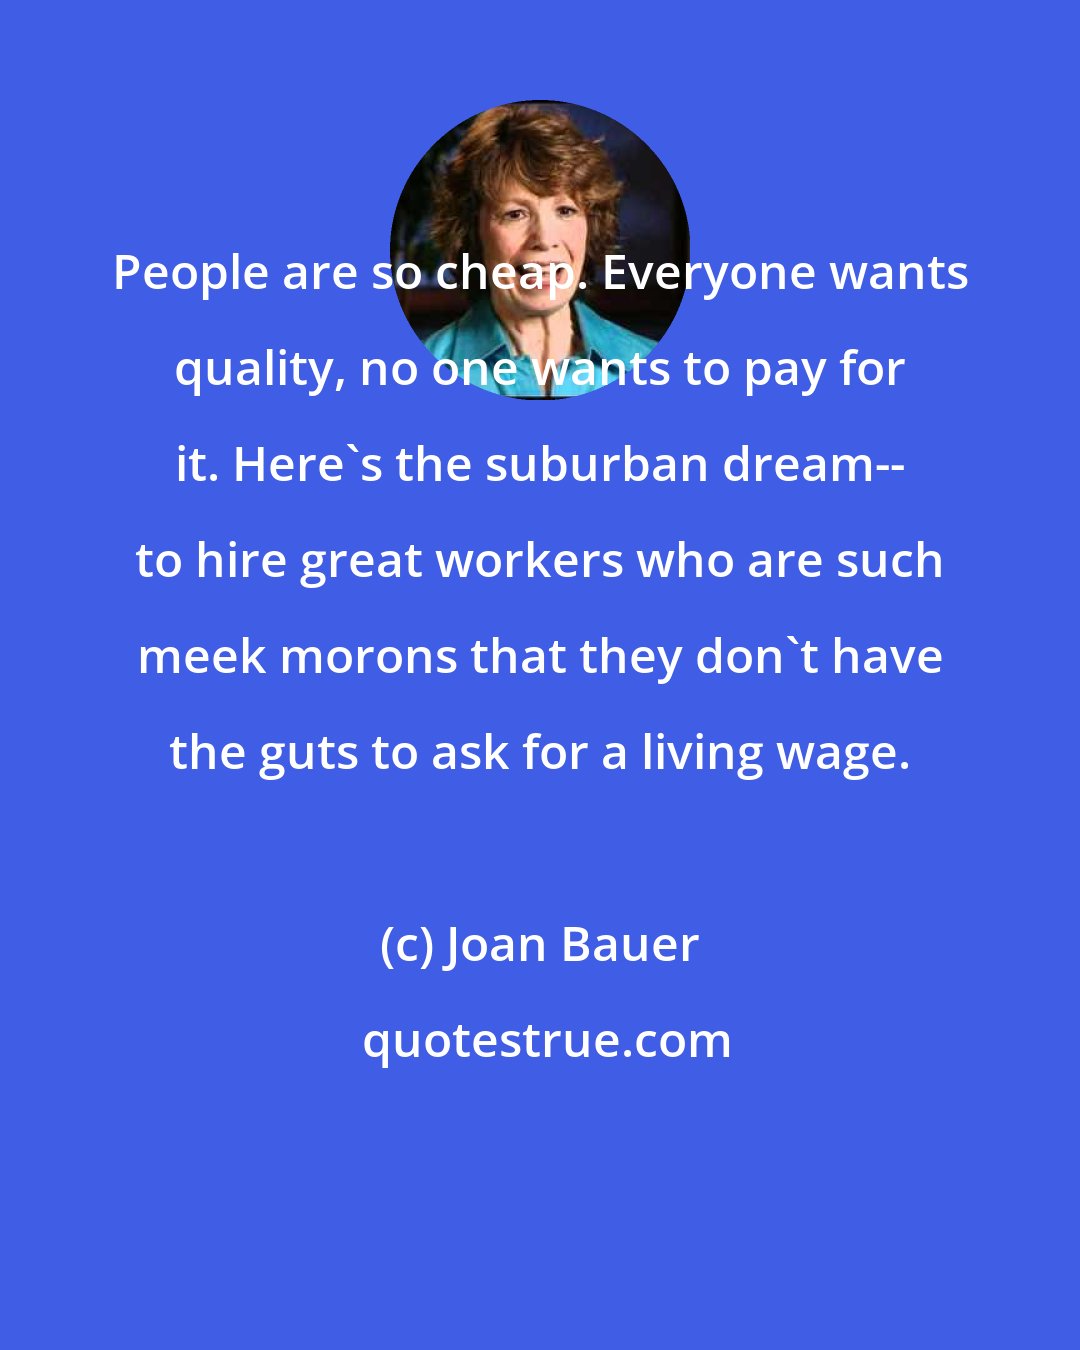 Joan Bauer: People are so cheap. Everyone wants quality, no one wants to pay for it. Here's the suburban dream-- to hire great workers who are such meek morons that they don't have the guts to ask for a living wage.